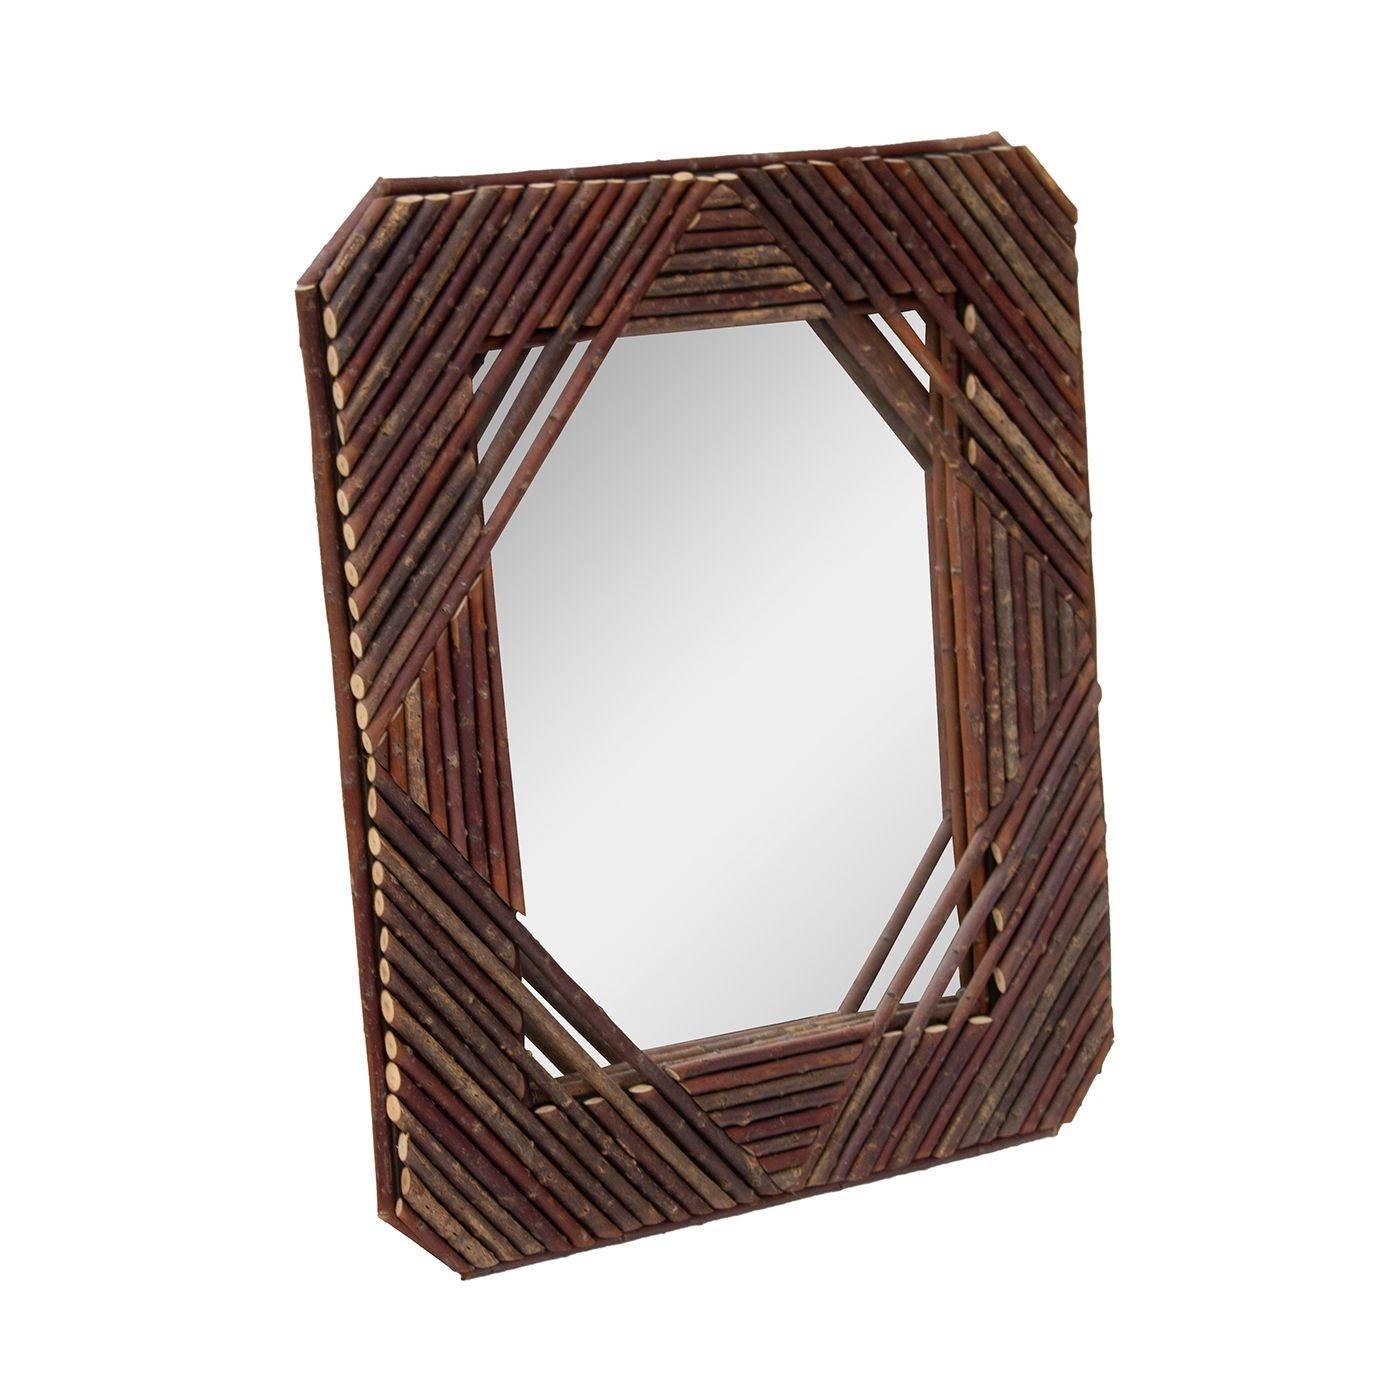 USA, 1970s
Handmade rectangular mirror made out of cut and patterned branches. Organic in a clean-lined profile. Nice visual interest at the four corners where the lines overlay the mirror. Mounted on plywood with mirror insert. Beautiful twigwork